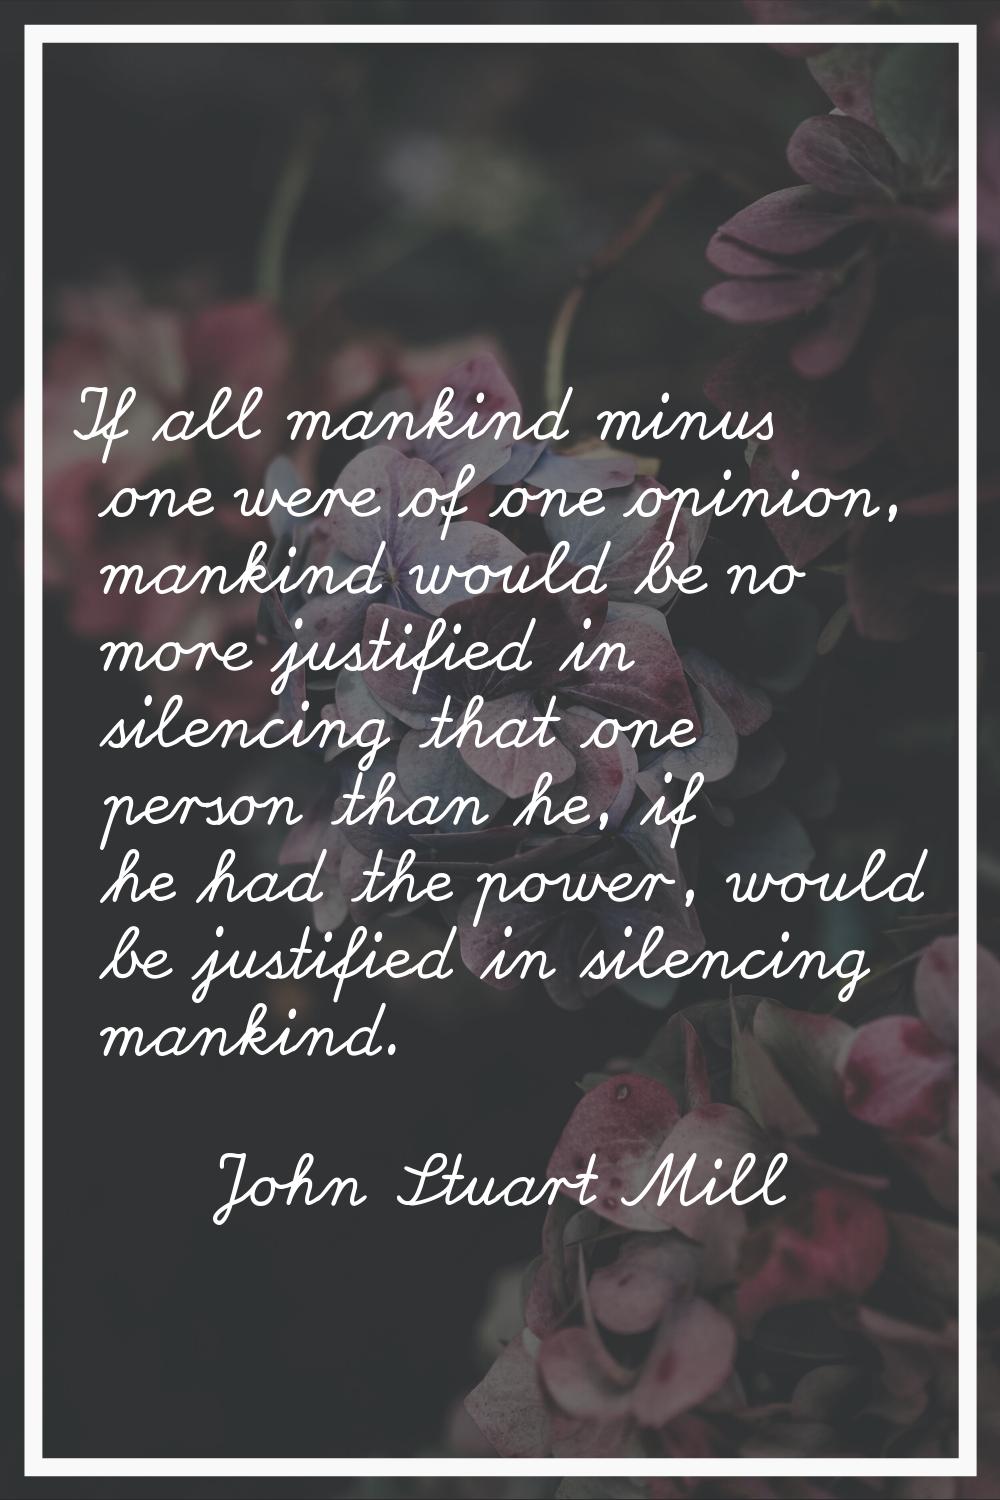 If all mankind minus one were of one opinion, mankind would be no more justified in silencing that 